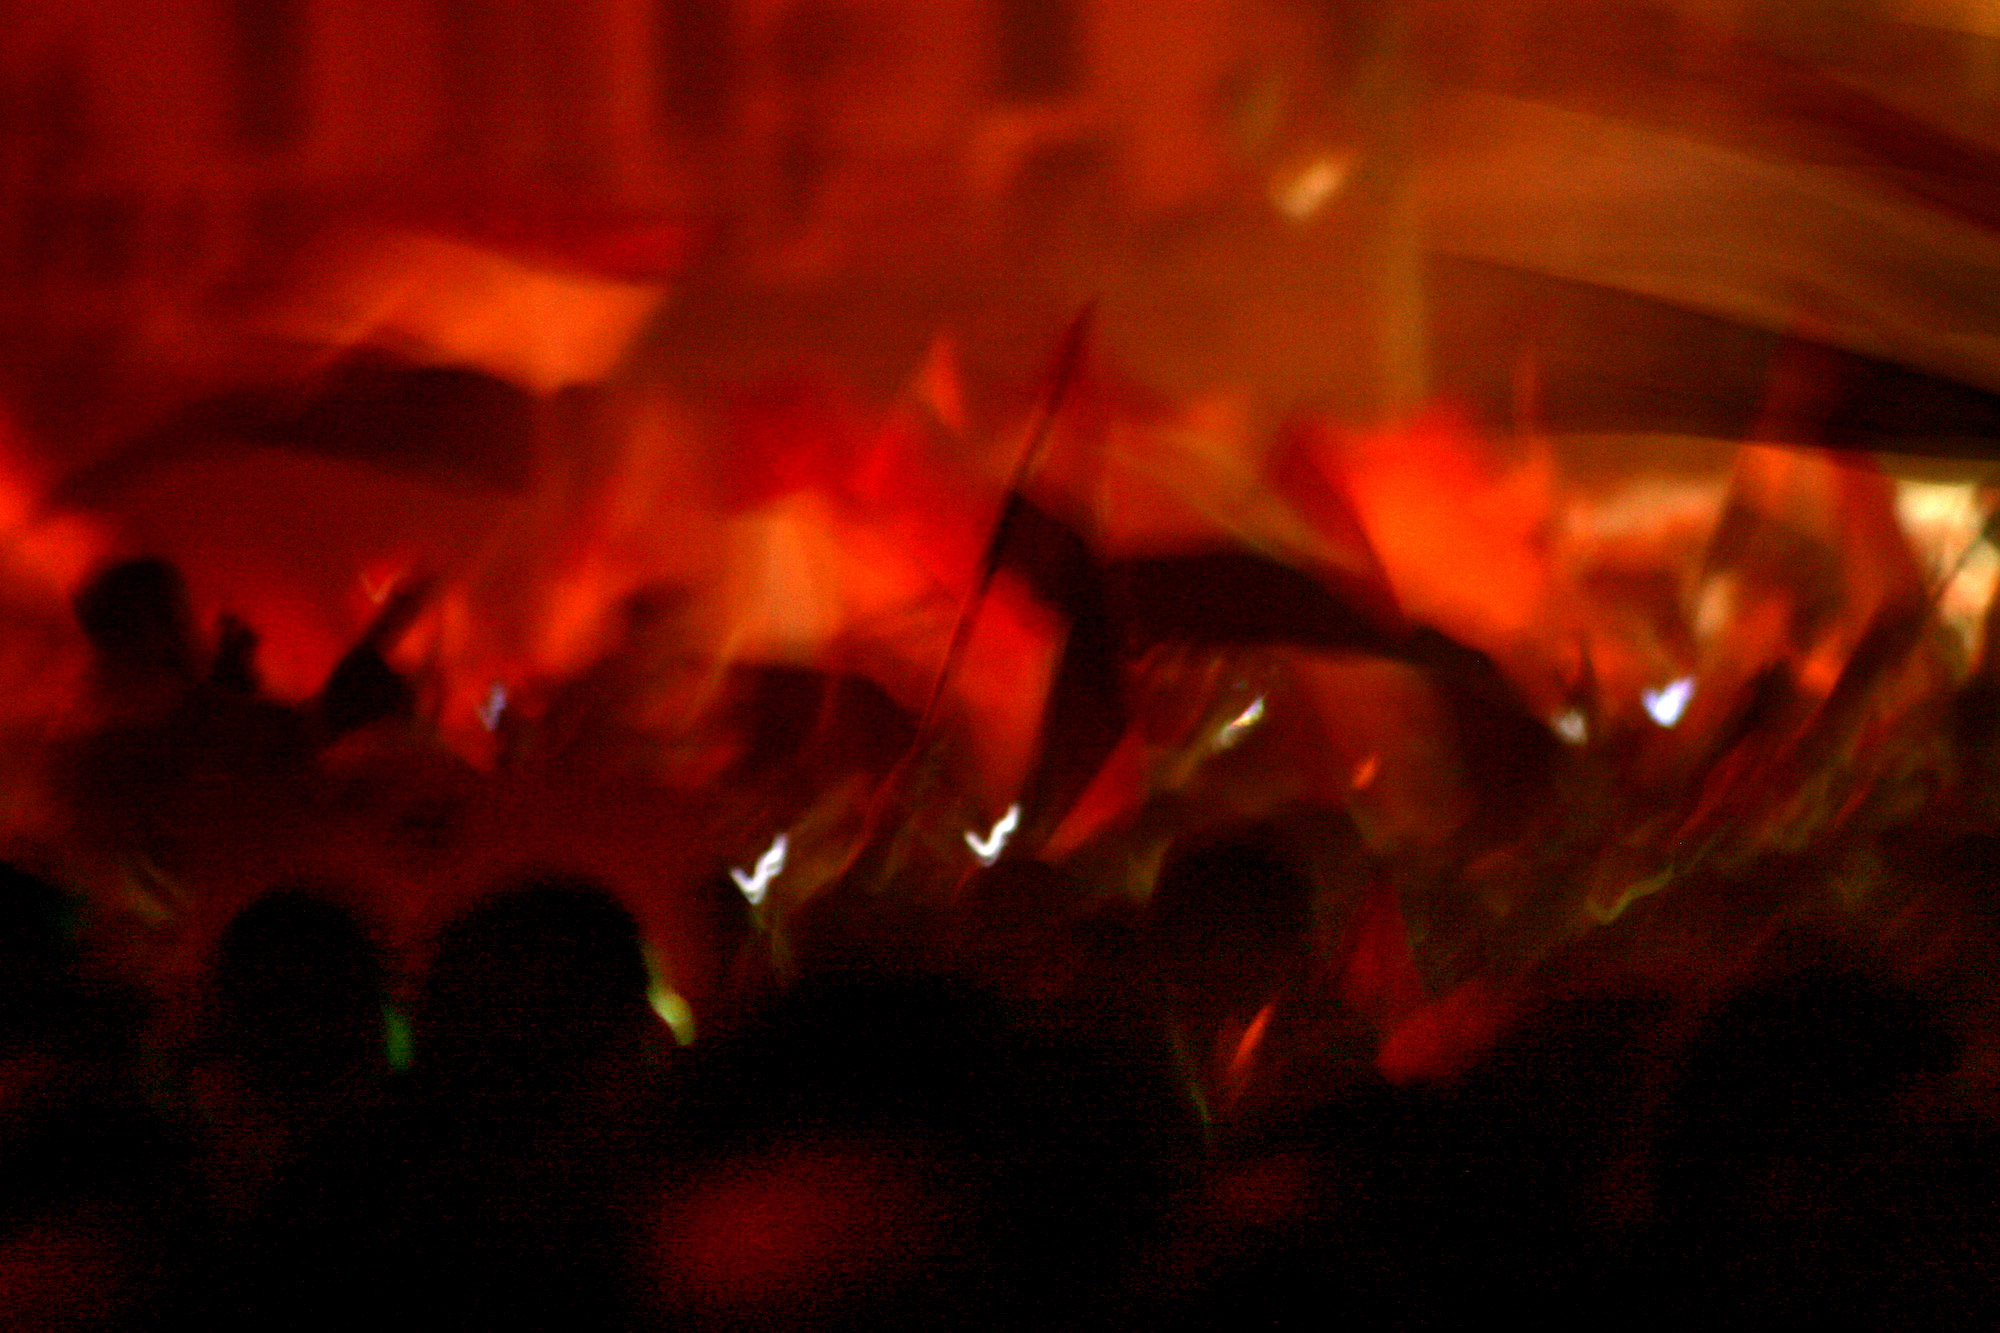 7:17 p.m. Demonstrators wave flags and raise their fists in the air while celebrating the resignation of Egyptian President Hosni Mubarak in Tahrir Square, Cairo, Feb. 11, 2011.